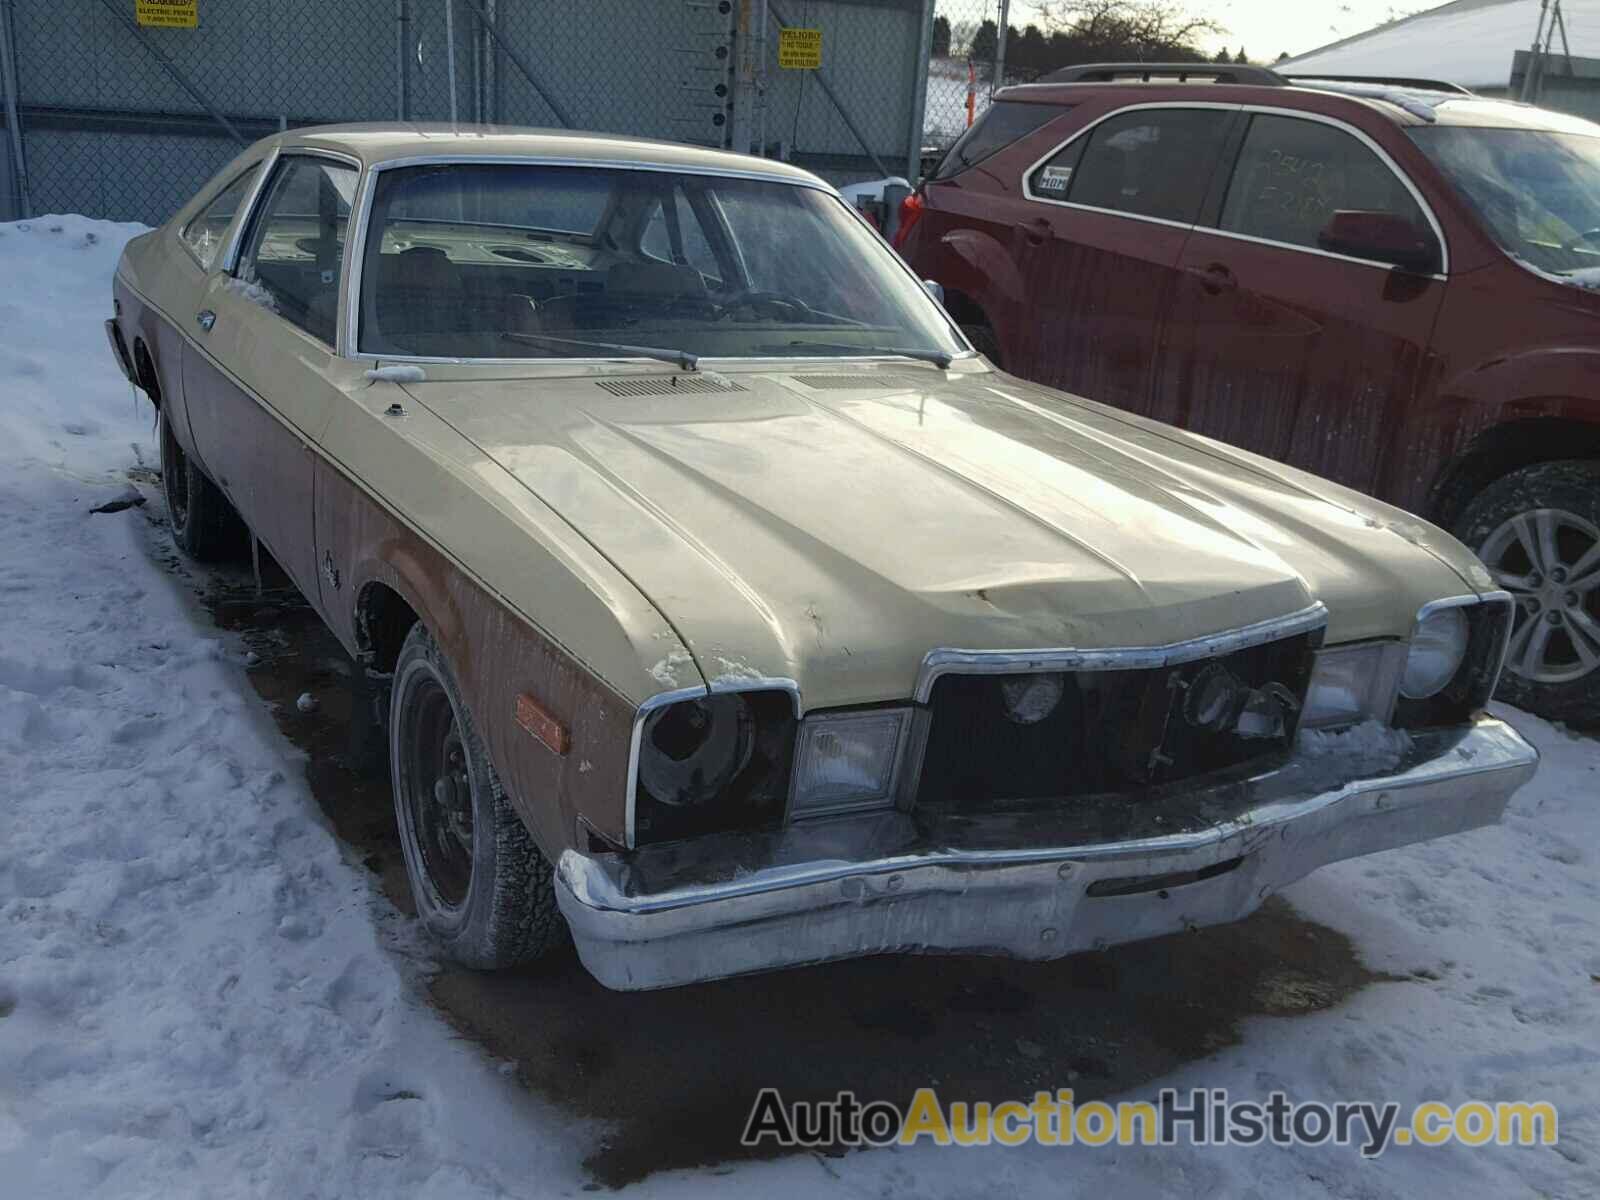 1979 PLYMOUTH VOLARE, HL29D9B101205